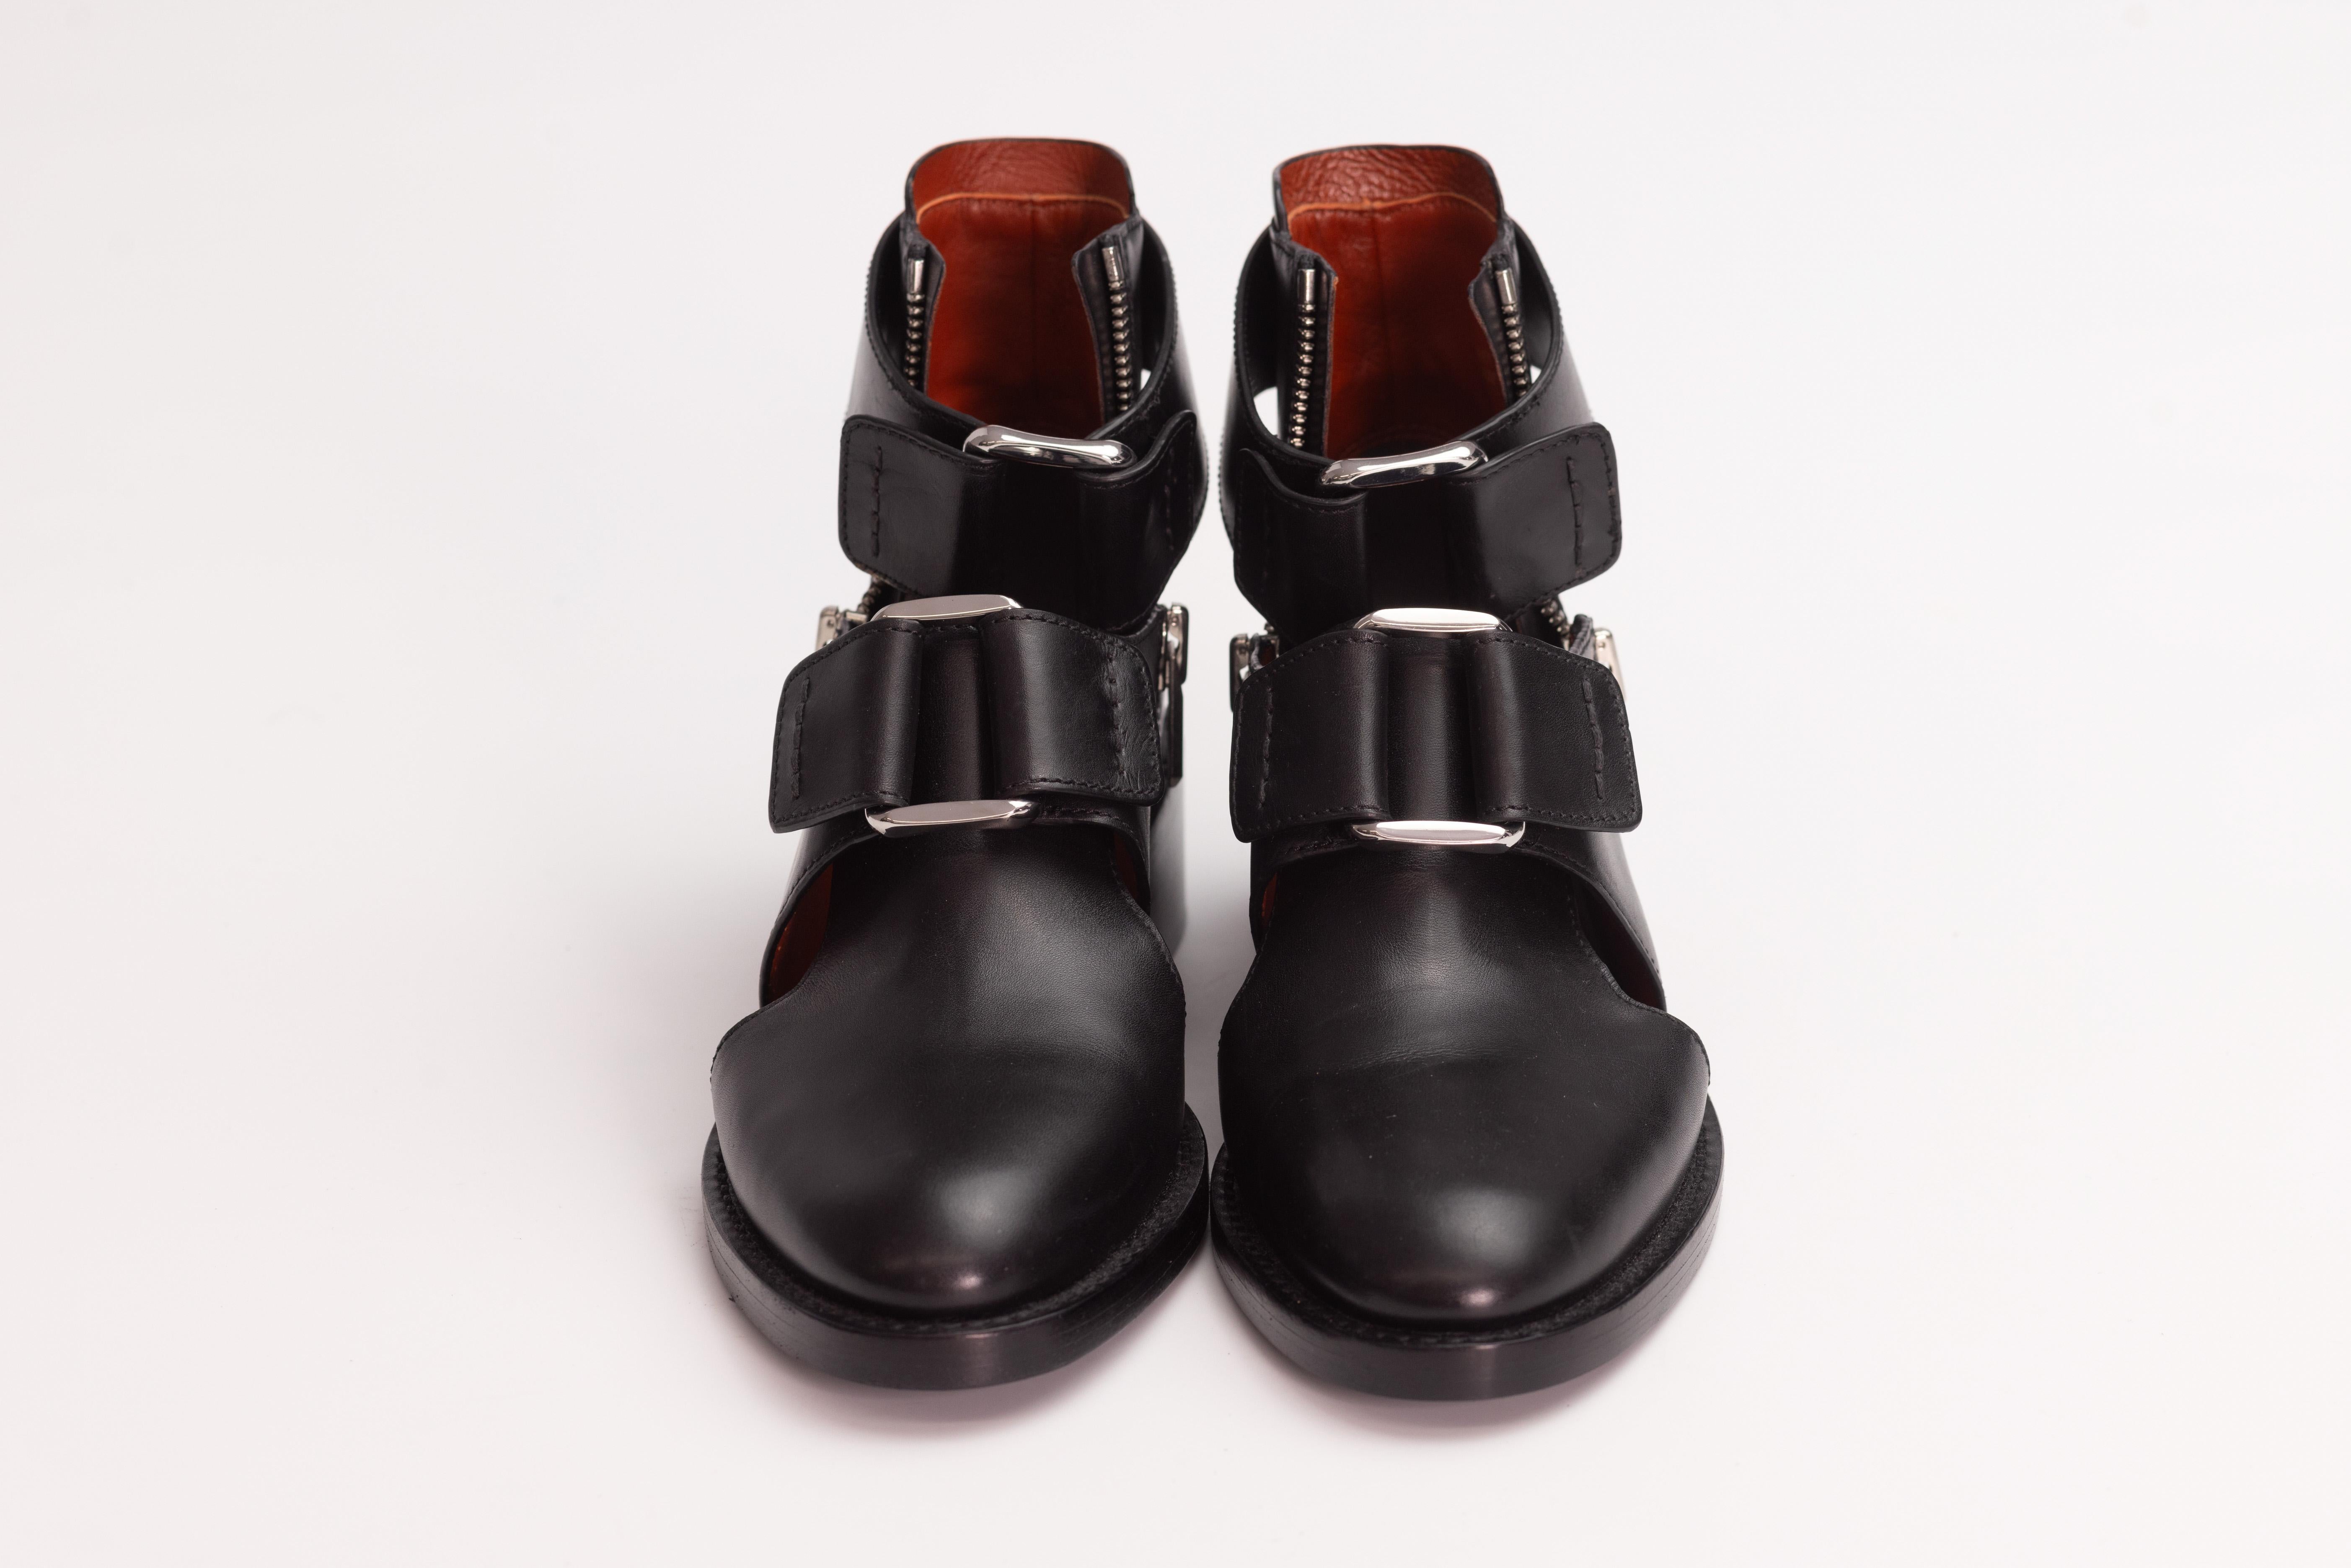 3.1 Phillip Lim Boot Black Leather Boots (US 8) In Good Condition For Sale In Montreal, Quebec